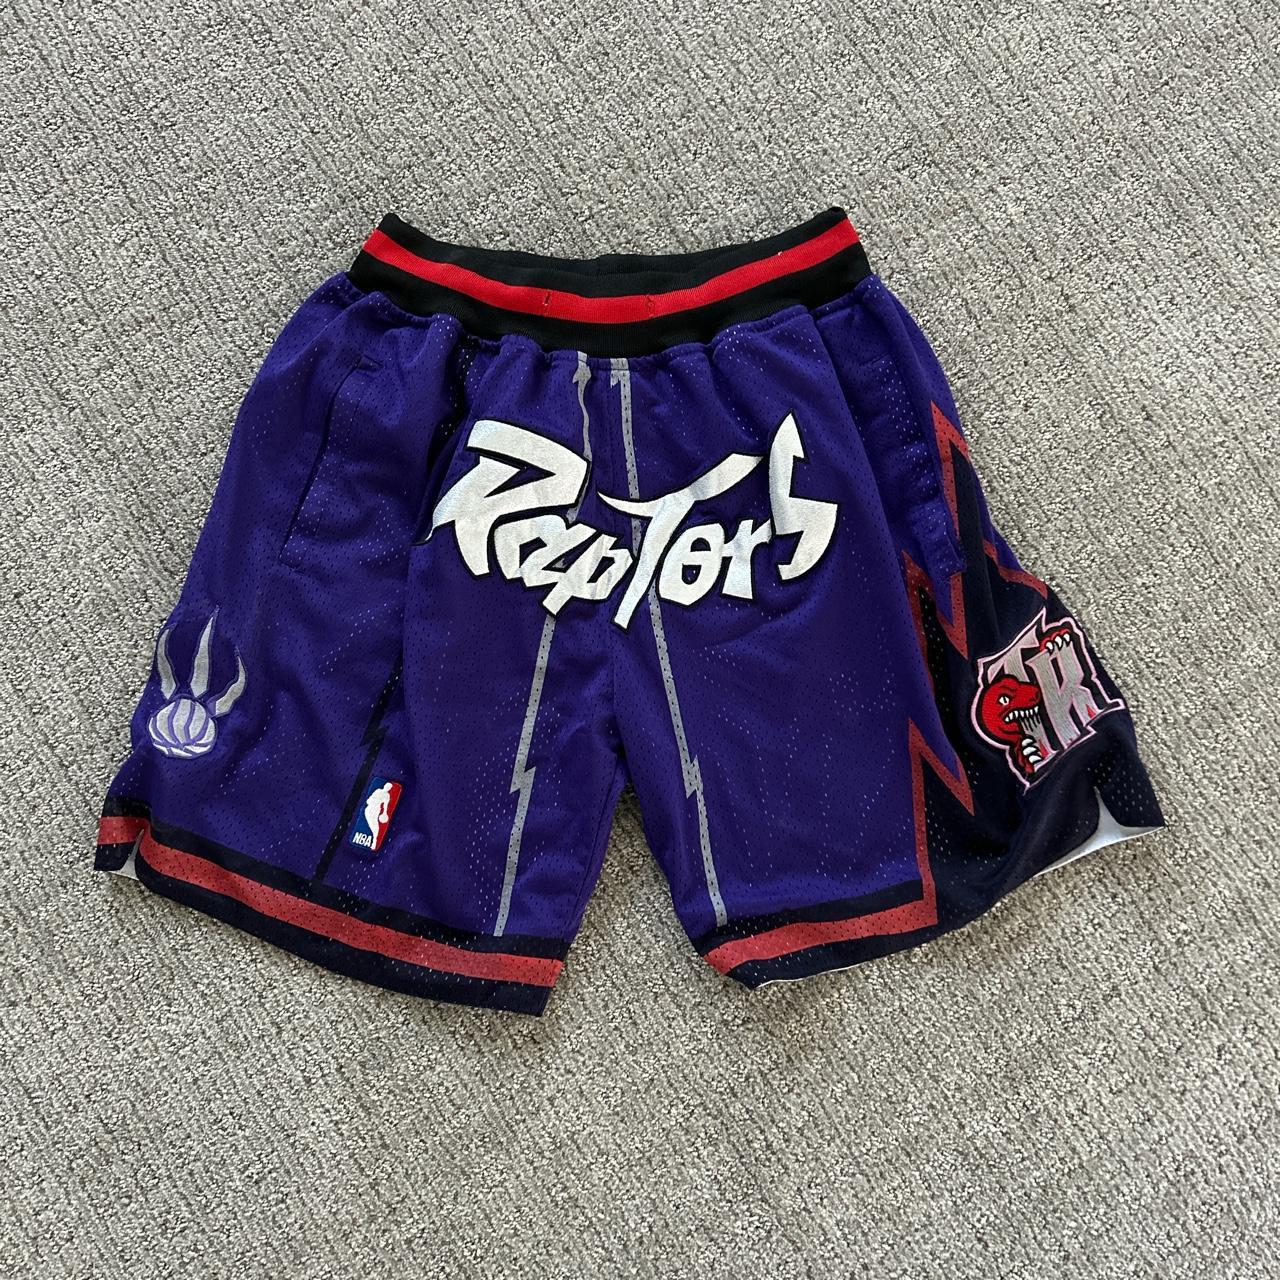 Vintage Toronto Raptors Just Don shorts from late